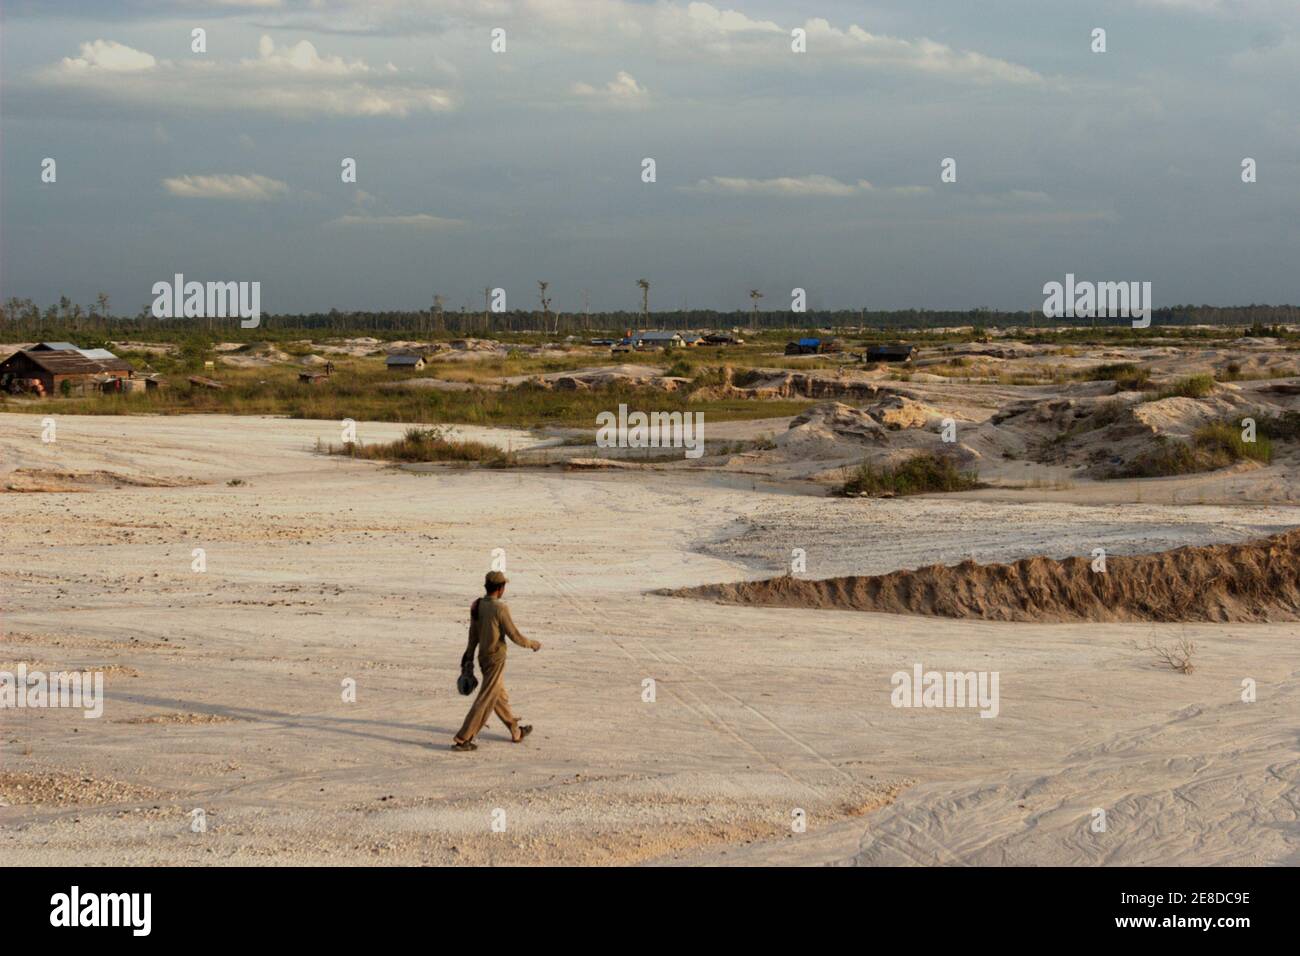 A gold miner walking down the sandy landscape of the small-scale gold mining area in Hampalit, Katingan regency, Central Kalimantan province, Indonesia. Stock Photo